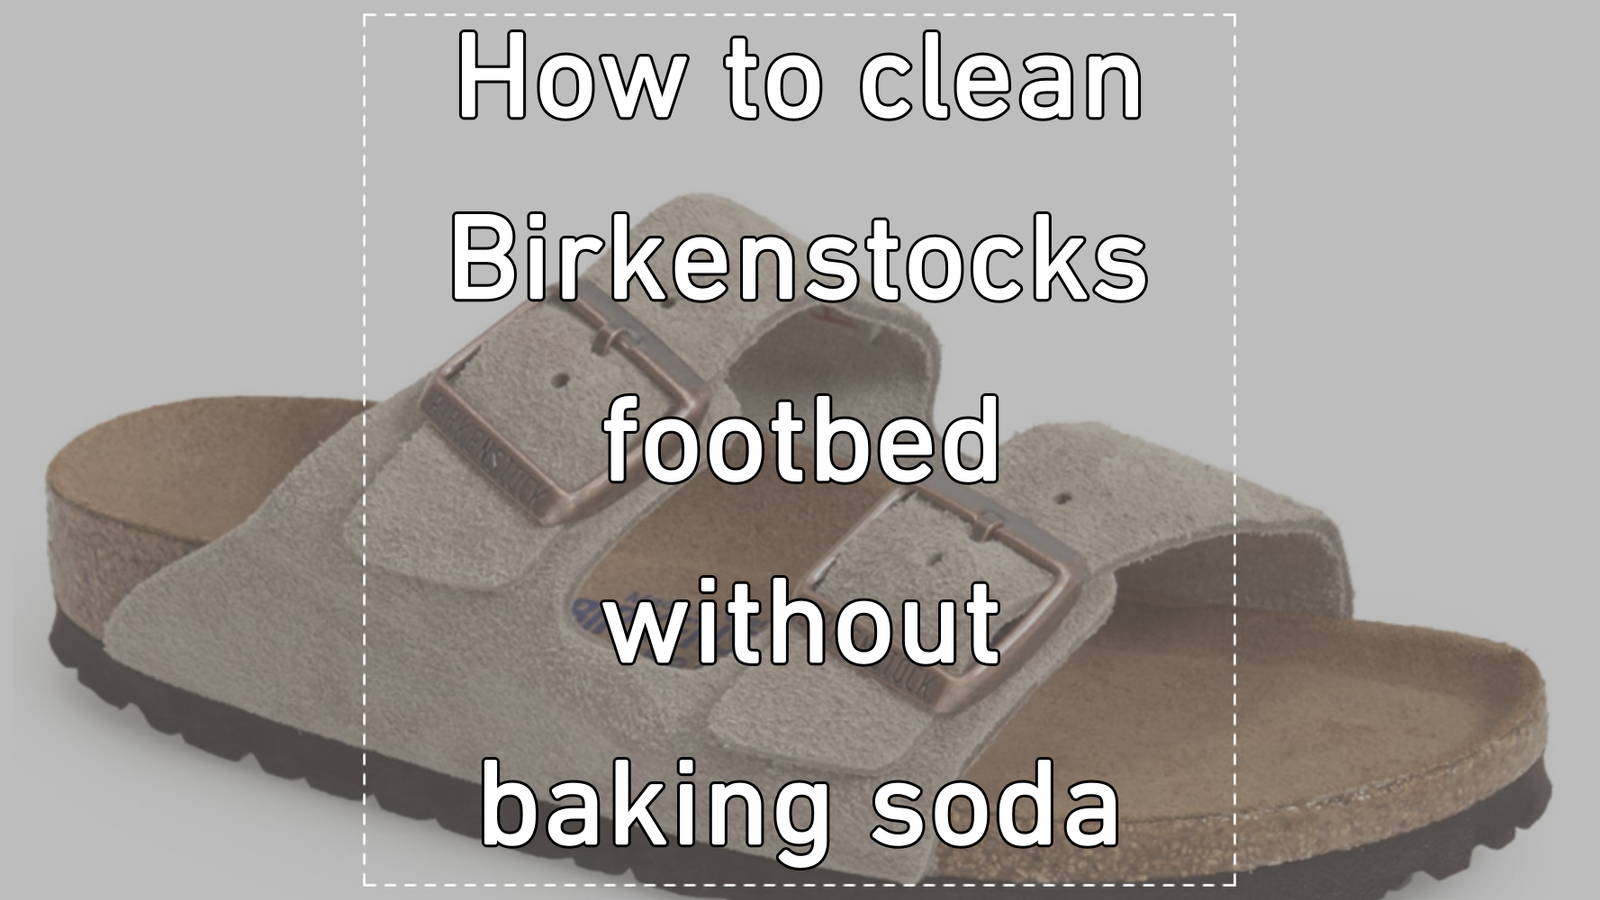 How to clean Birkenstocks footbed without baking soda